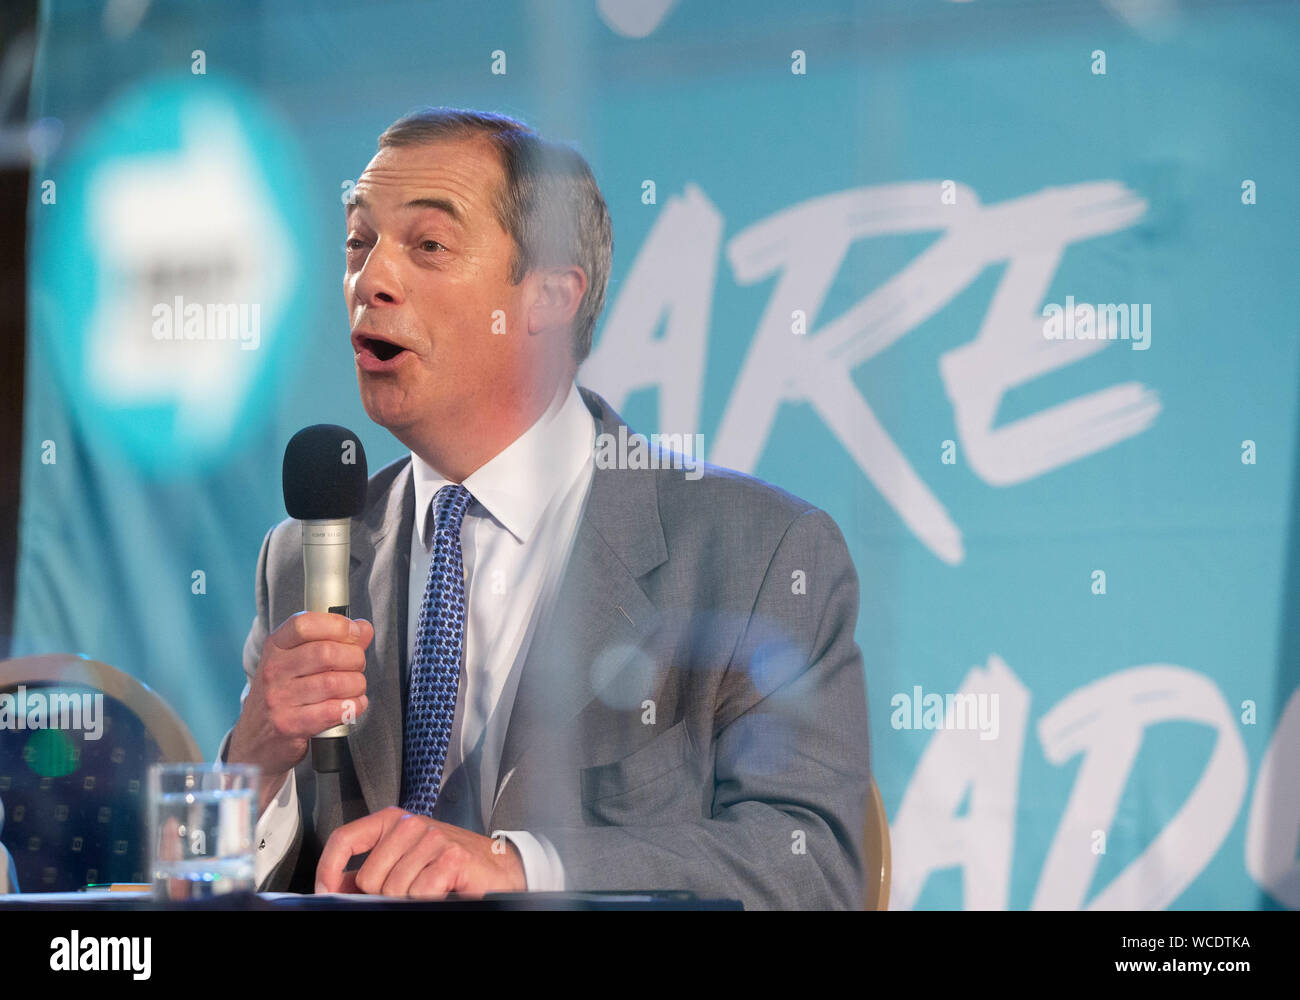 Brexit Party Leader, Nigel Farage, speaks at the Conference. The Brexit Party holds a conference in London to announce 635 Prospective Parliamentary c Stock Photo